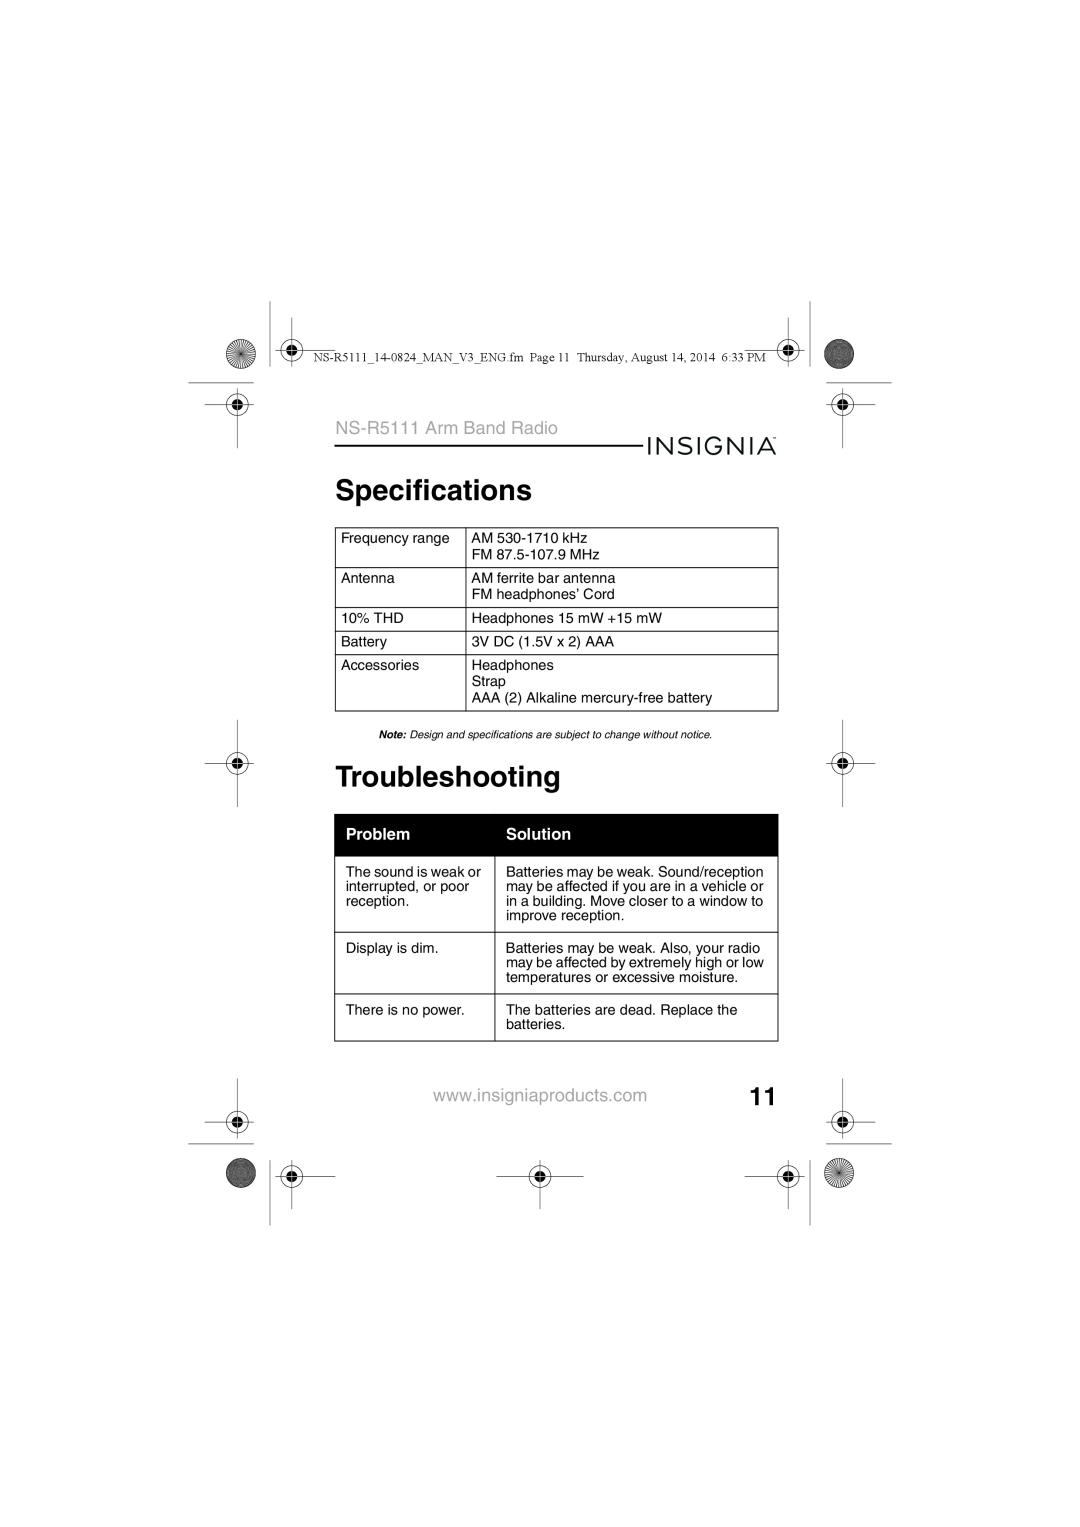 Insignia manual Specifications, Troubleshooting, Problem, Solution, NS-R5111Arm Band Radio 